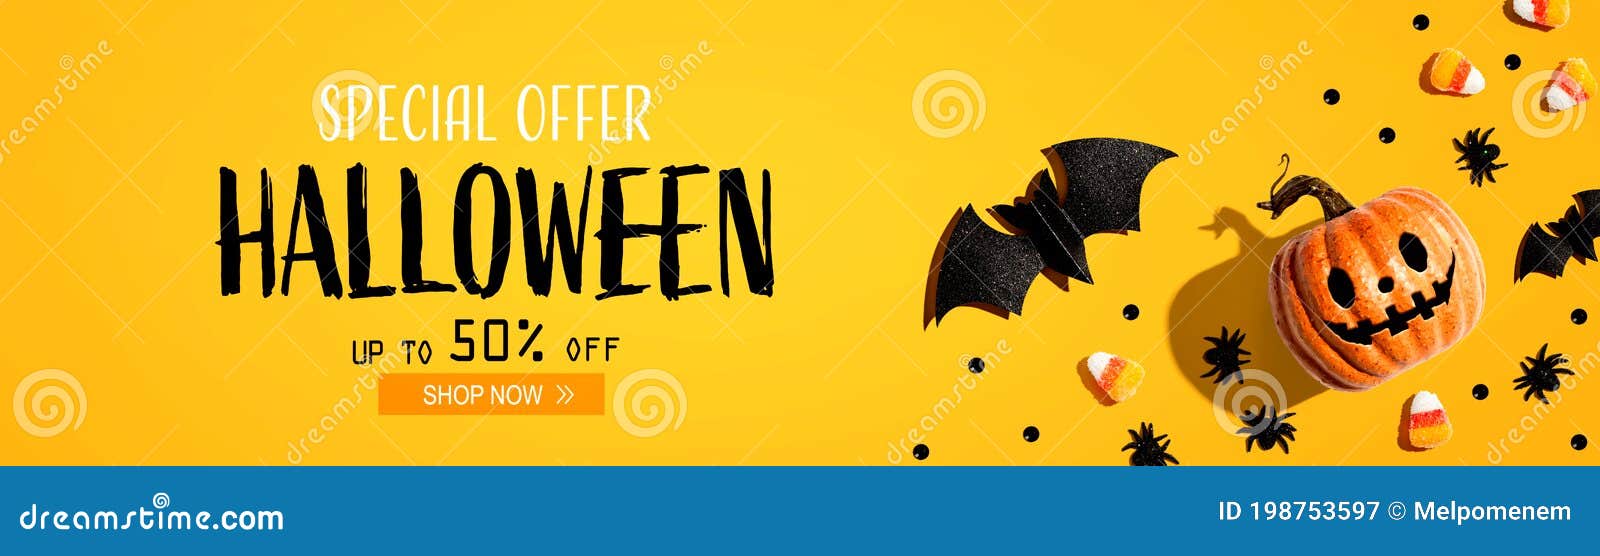 Halloween Sale Banner with Halloween Decorations Stock Image ...